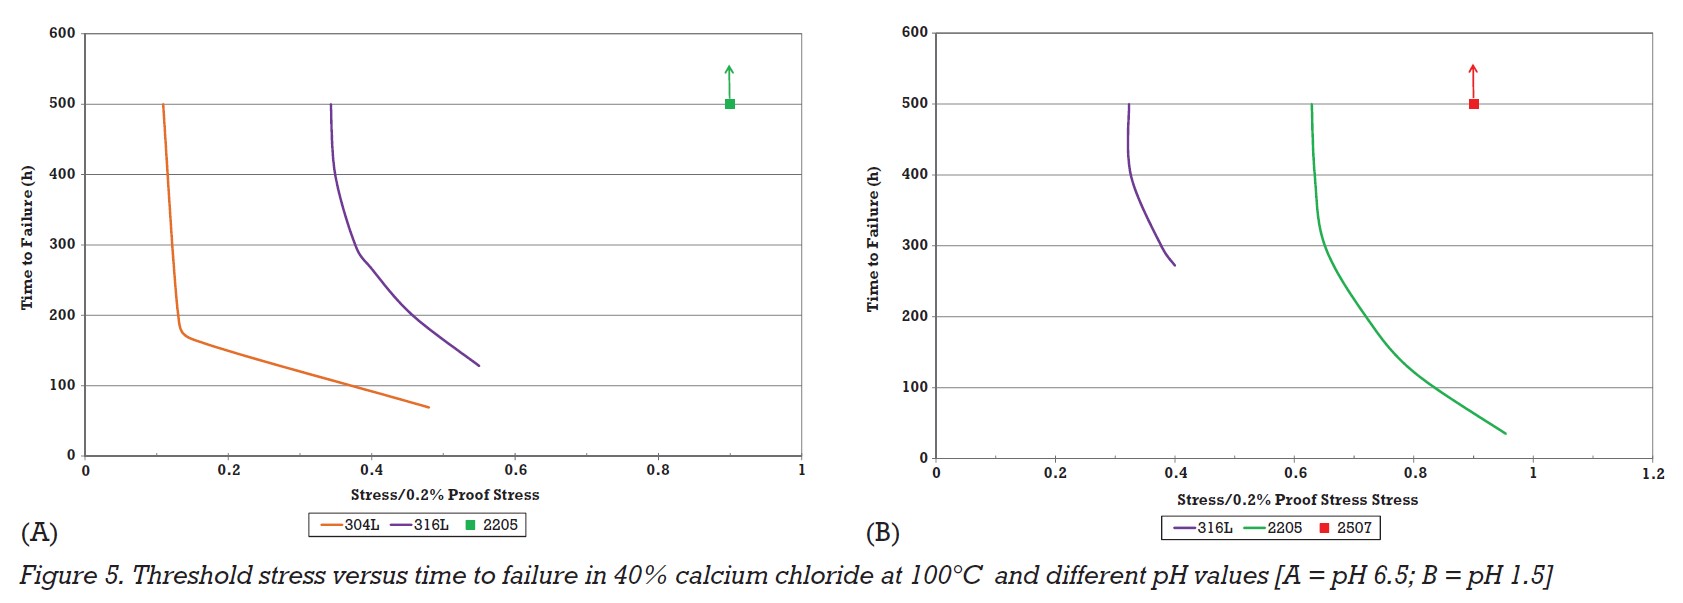 Figure 5. Threshold stress versus time to failure in 40% calcium chloride at 100°C and different pH values [A = pH 6.5; B = pH 1.5]